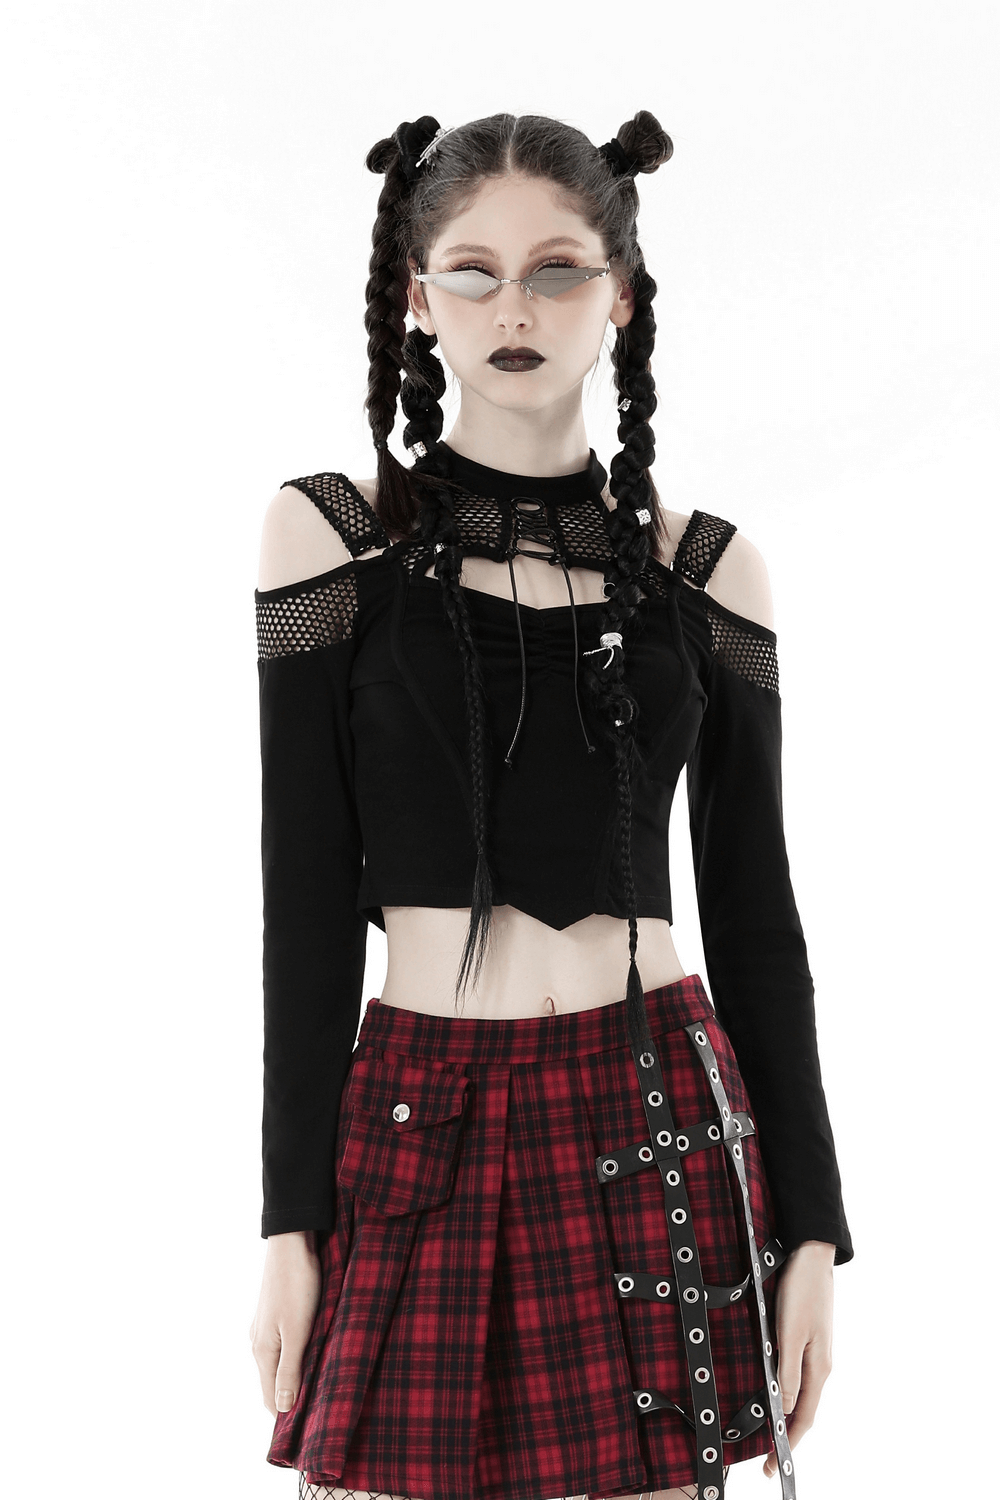 Women's Gothic and Rock Dark Fashion Apparel and Accessories